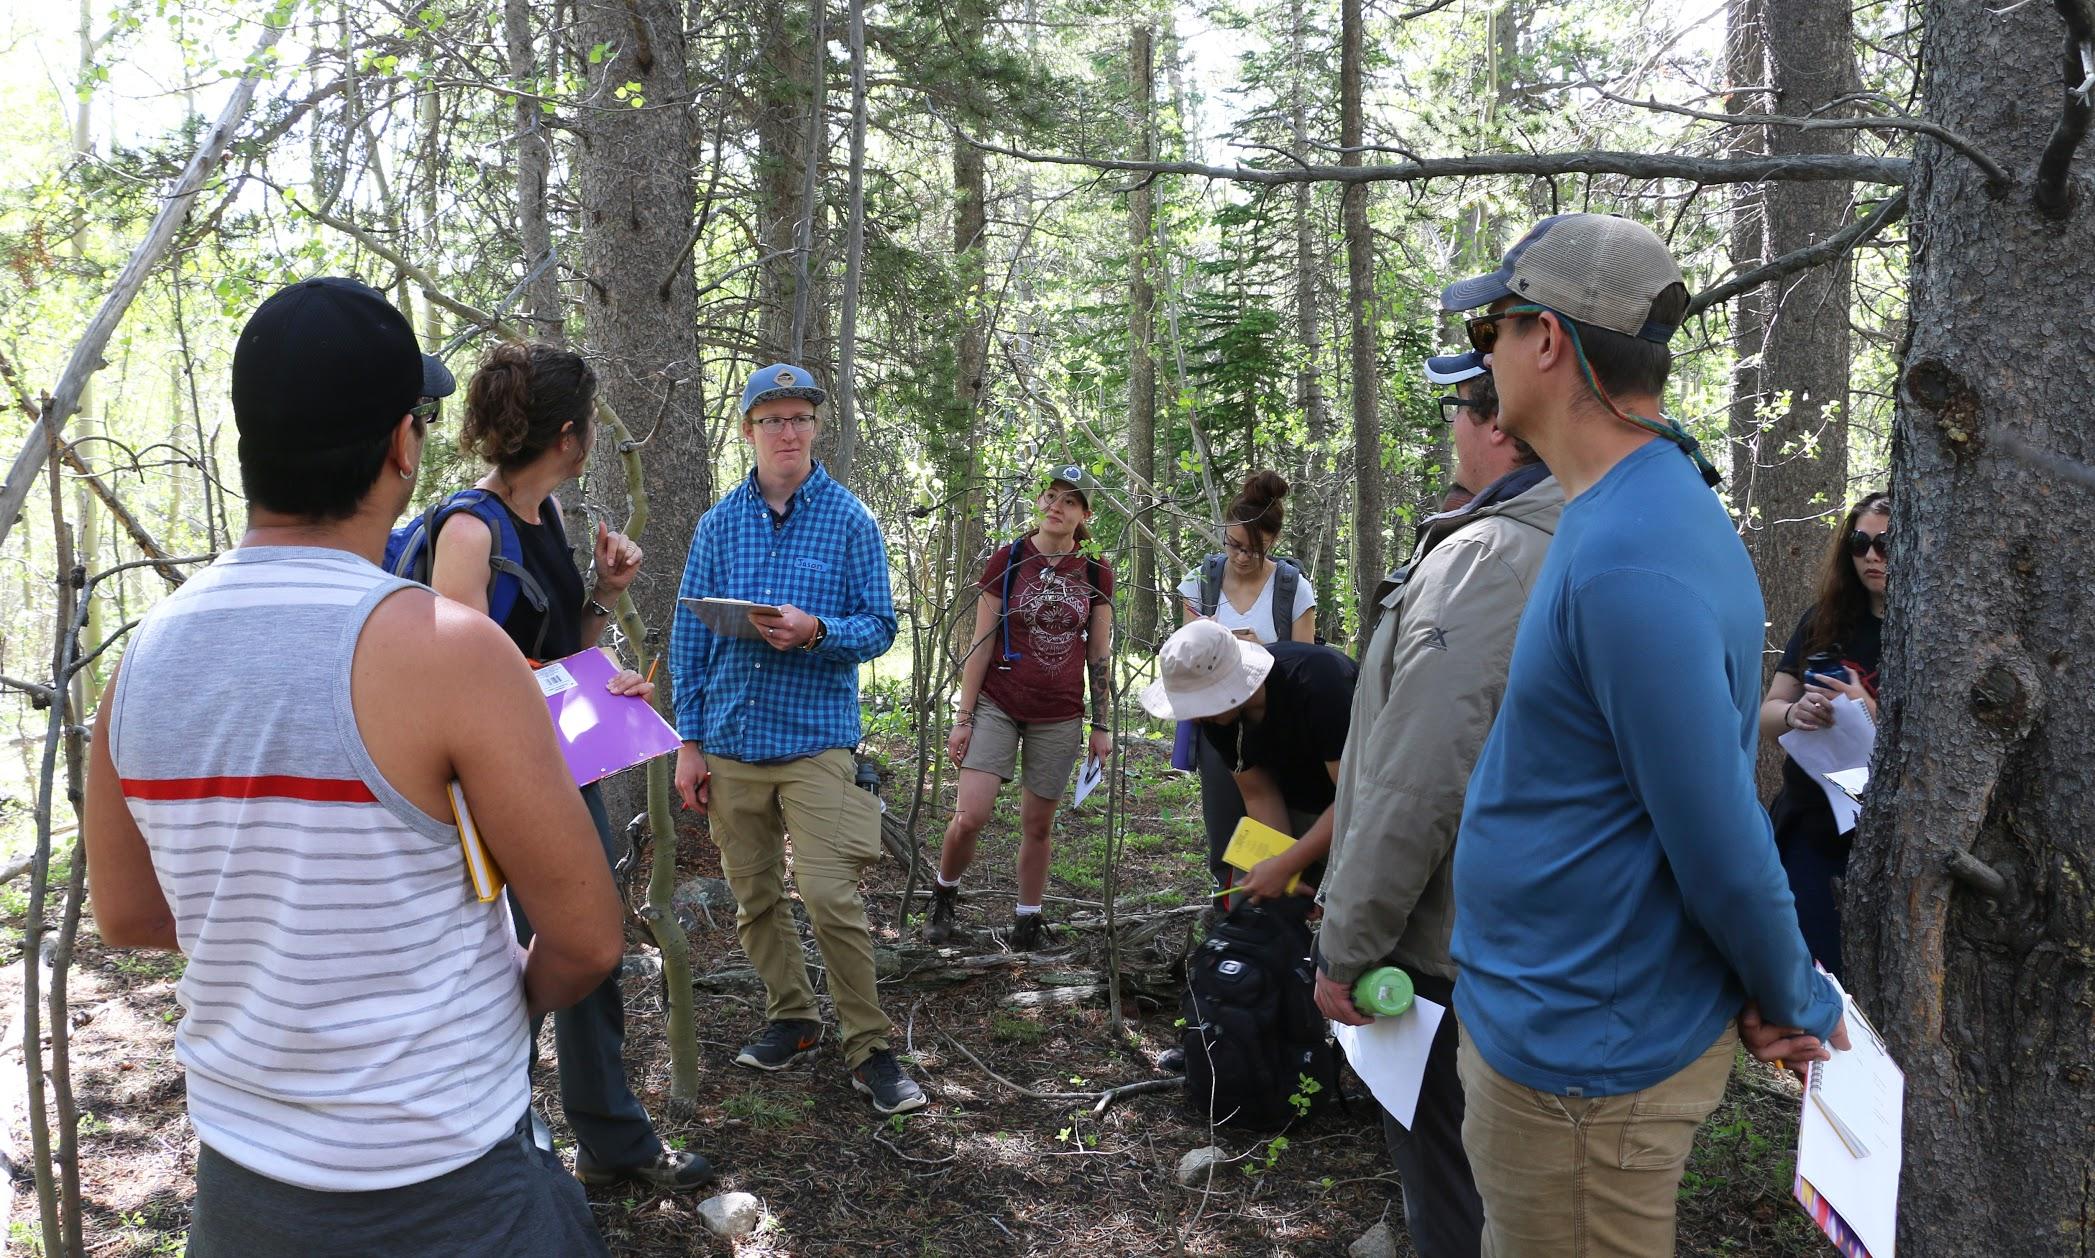 As part of the Research Experience for Community College Students program, participants learn from NOAA and Colorado University-Boulder mentors as they make field observations and think about possible research questions at CU Boulder’s Mountain Research Station. The program gives community college students an authentic research experience that allows them to explore environmental or geosciences and gain the confidence to transition to a four-year program in the STEM disciplines.